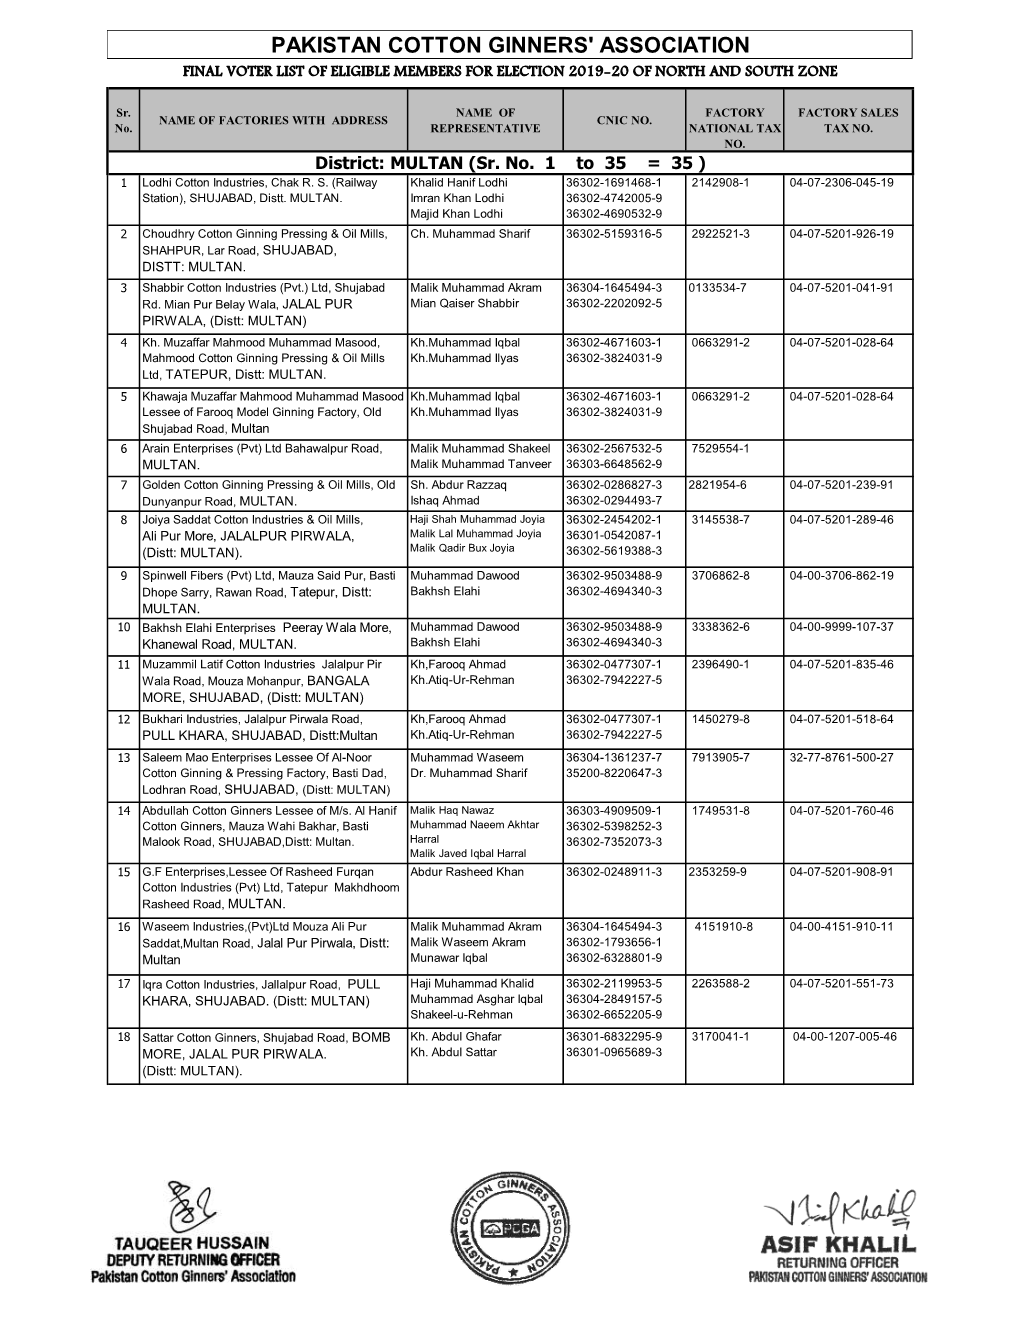 Pakistan Cotton Ginners' Association Final Voter List of Eligible Members for Election 2019-20 of North and South Zone